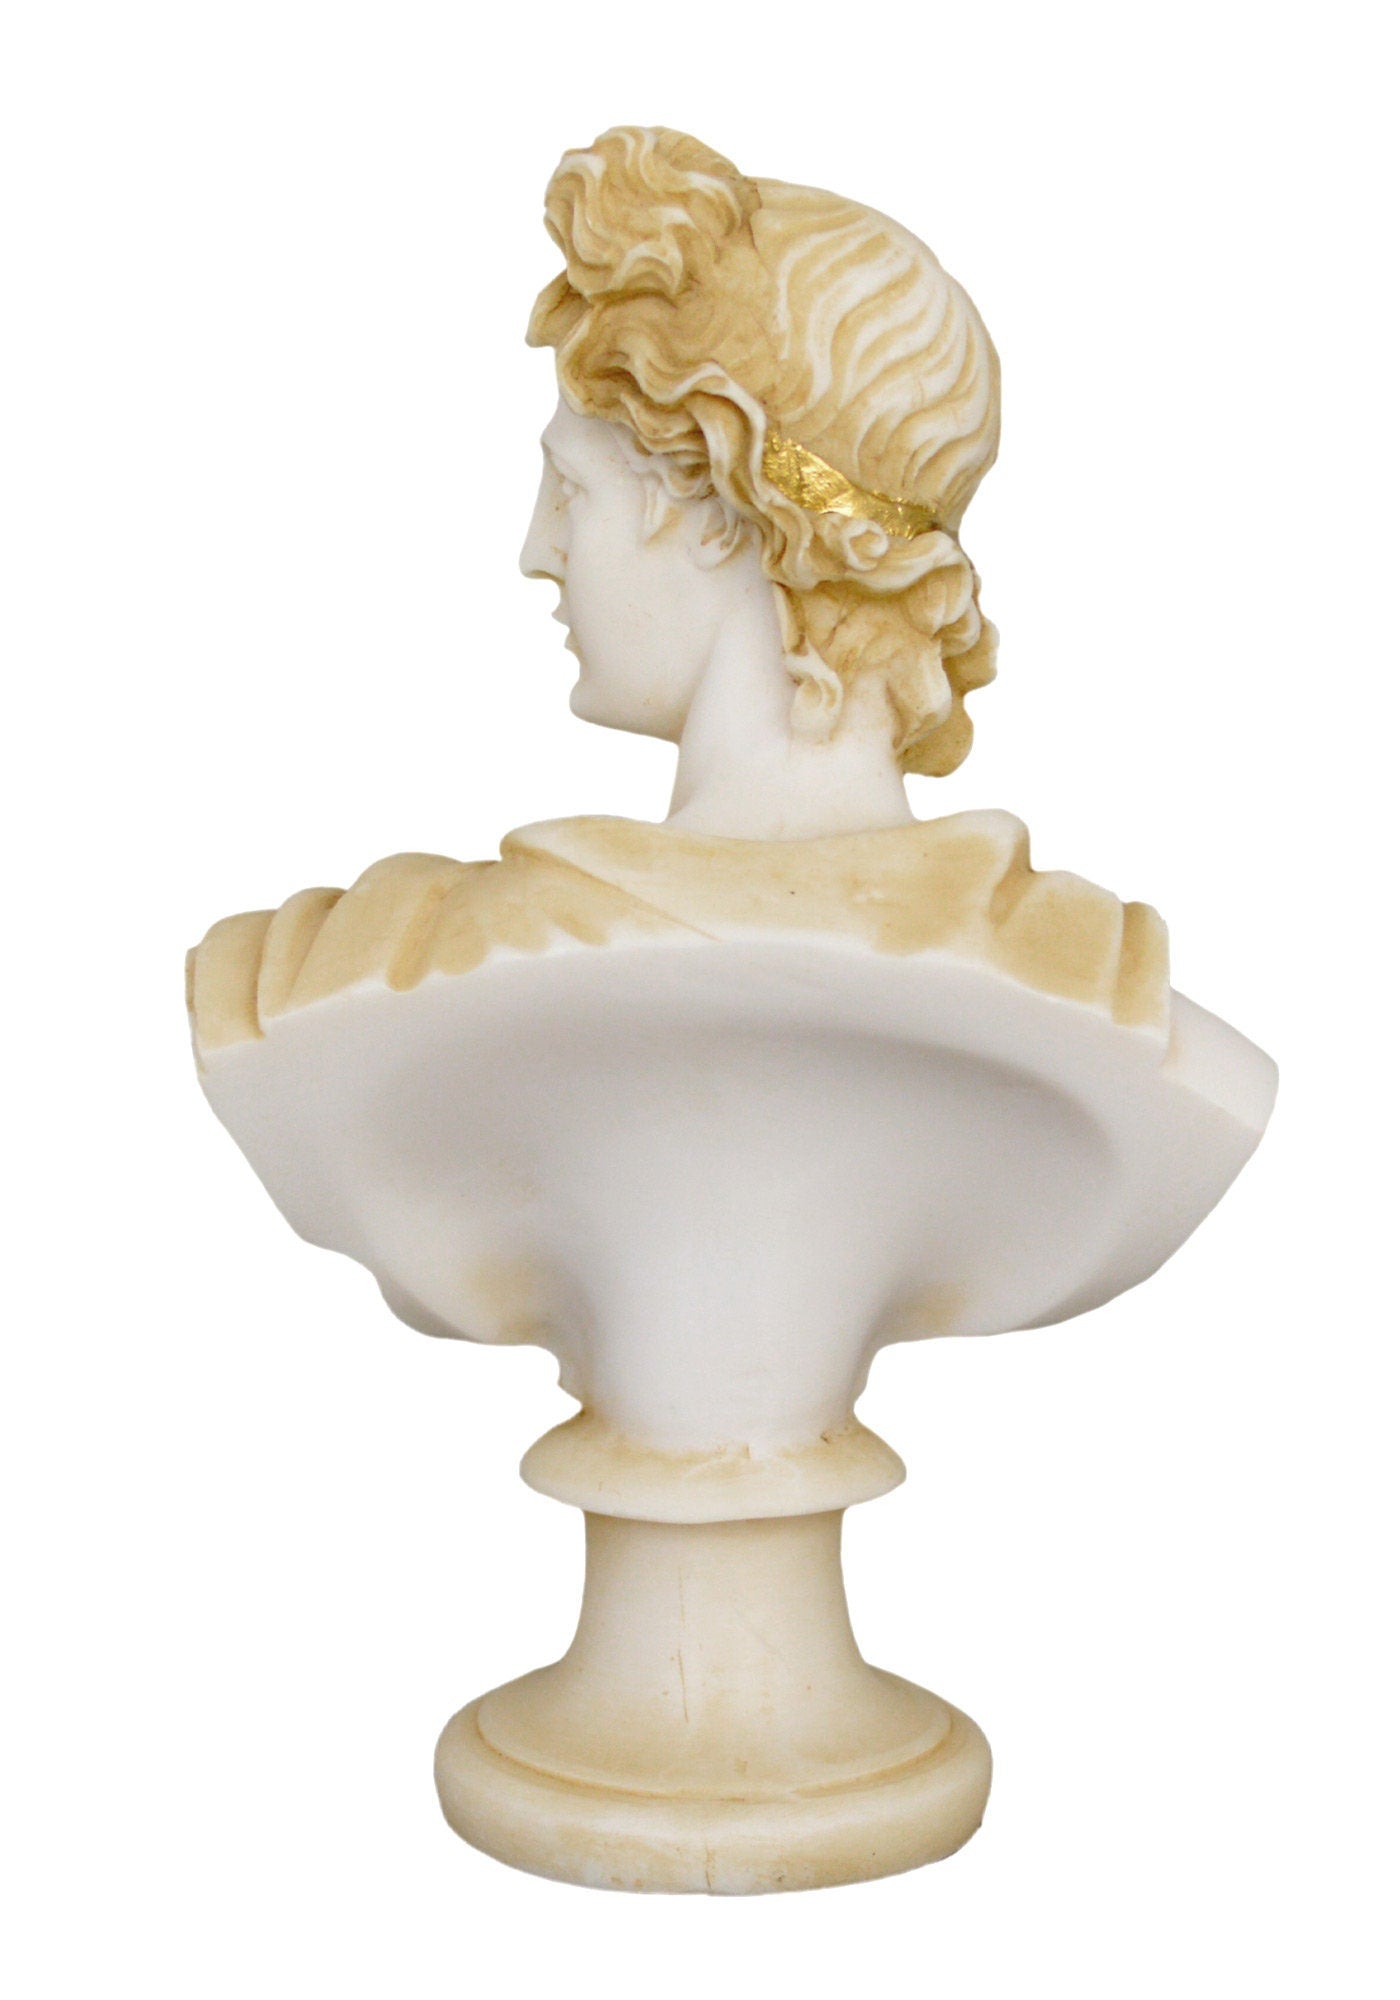 Apollo Bust - Greek Roman God of Music, Poetry, Sun, Light, Prophecy and Healing  - Aged Alabaster